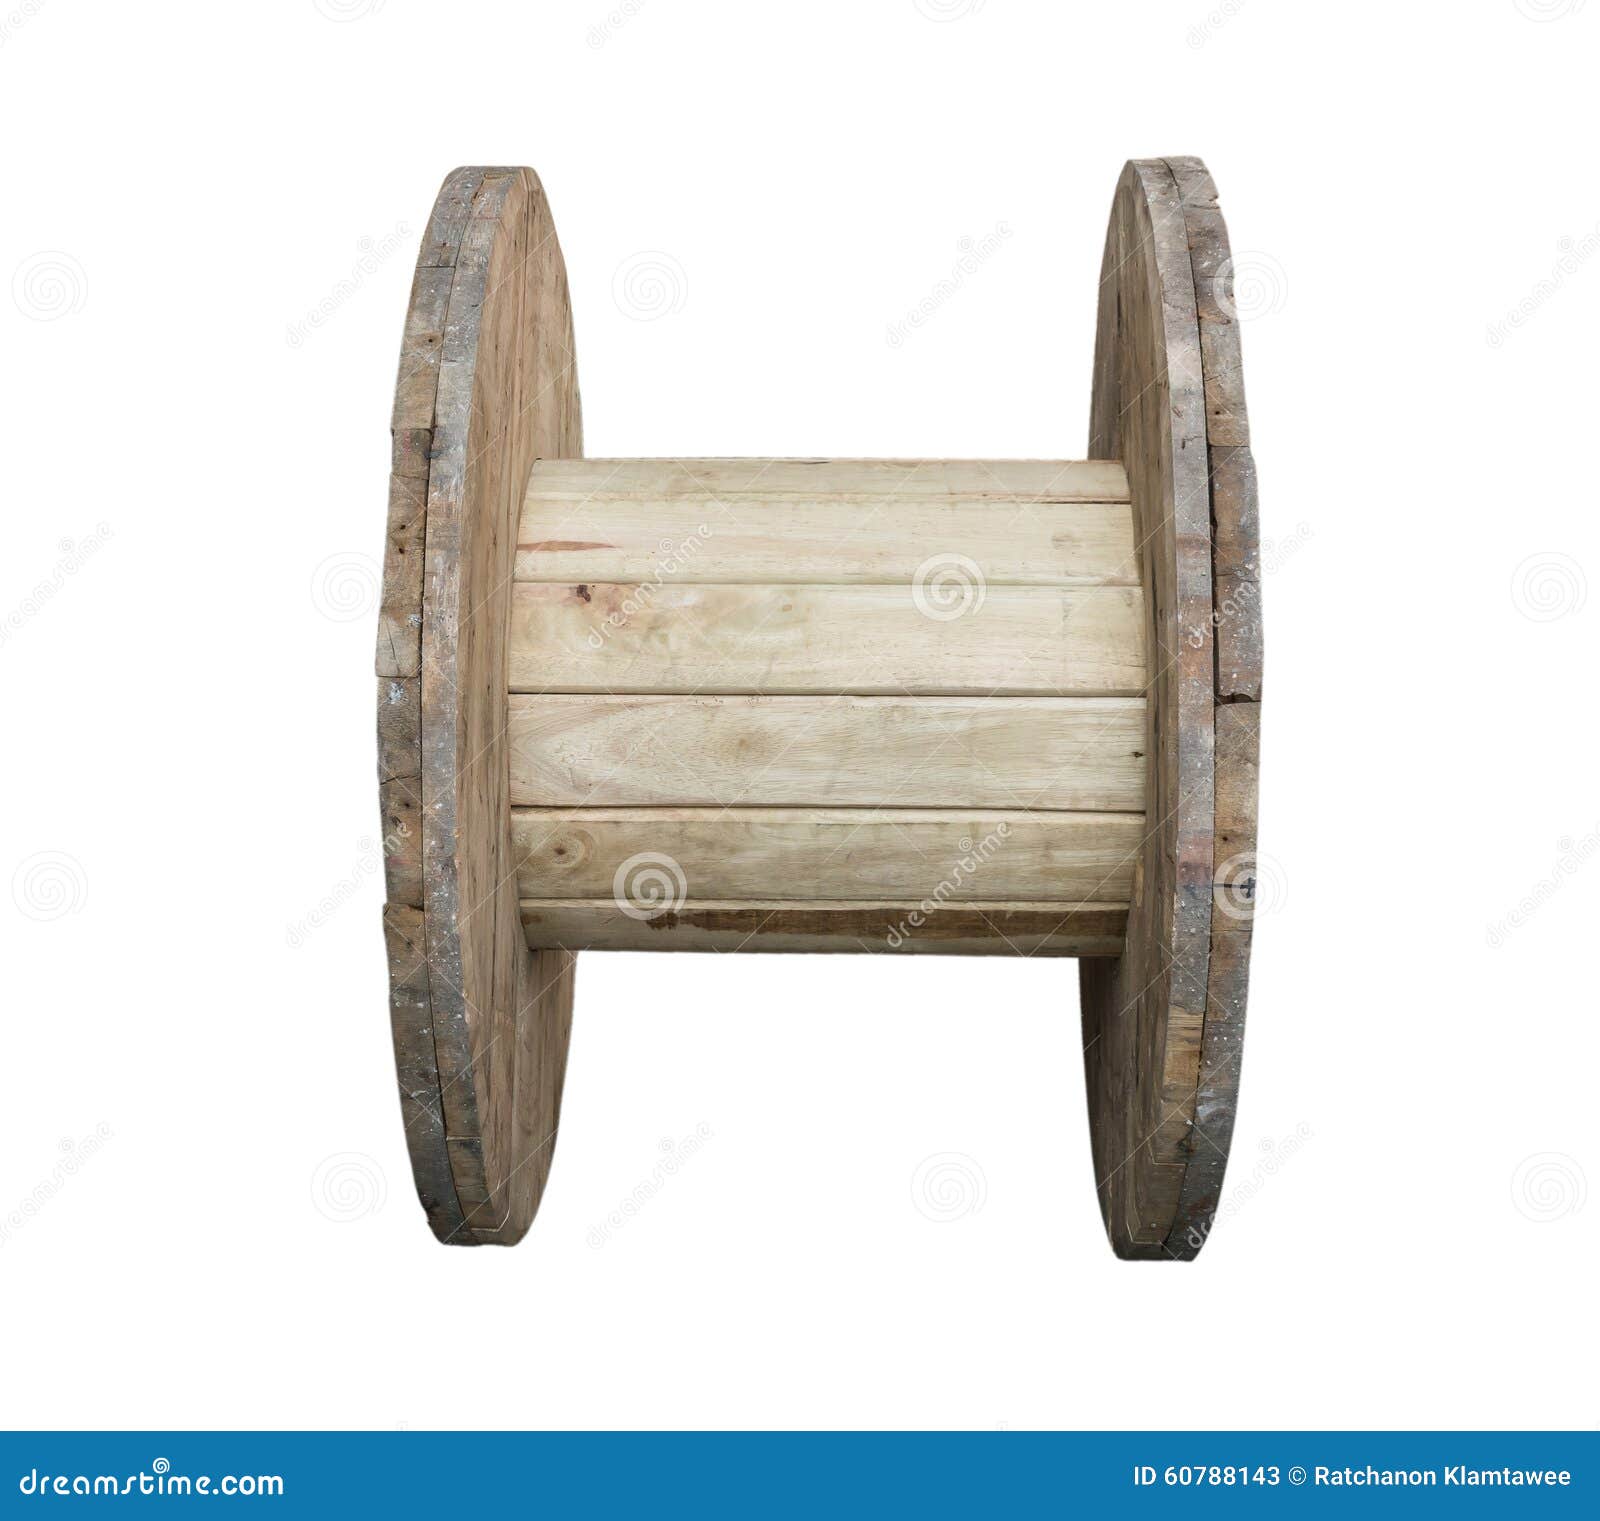 Wooden cable spool table stock image. Image of brown - 60788143